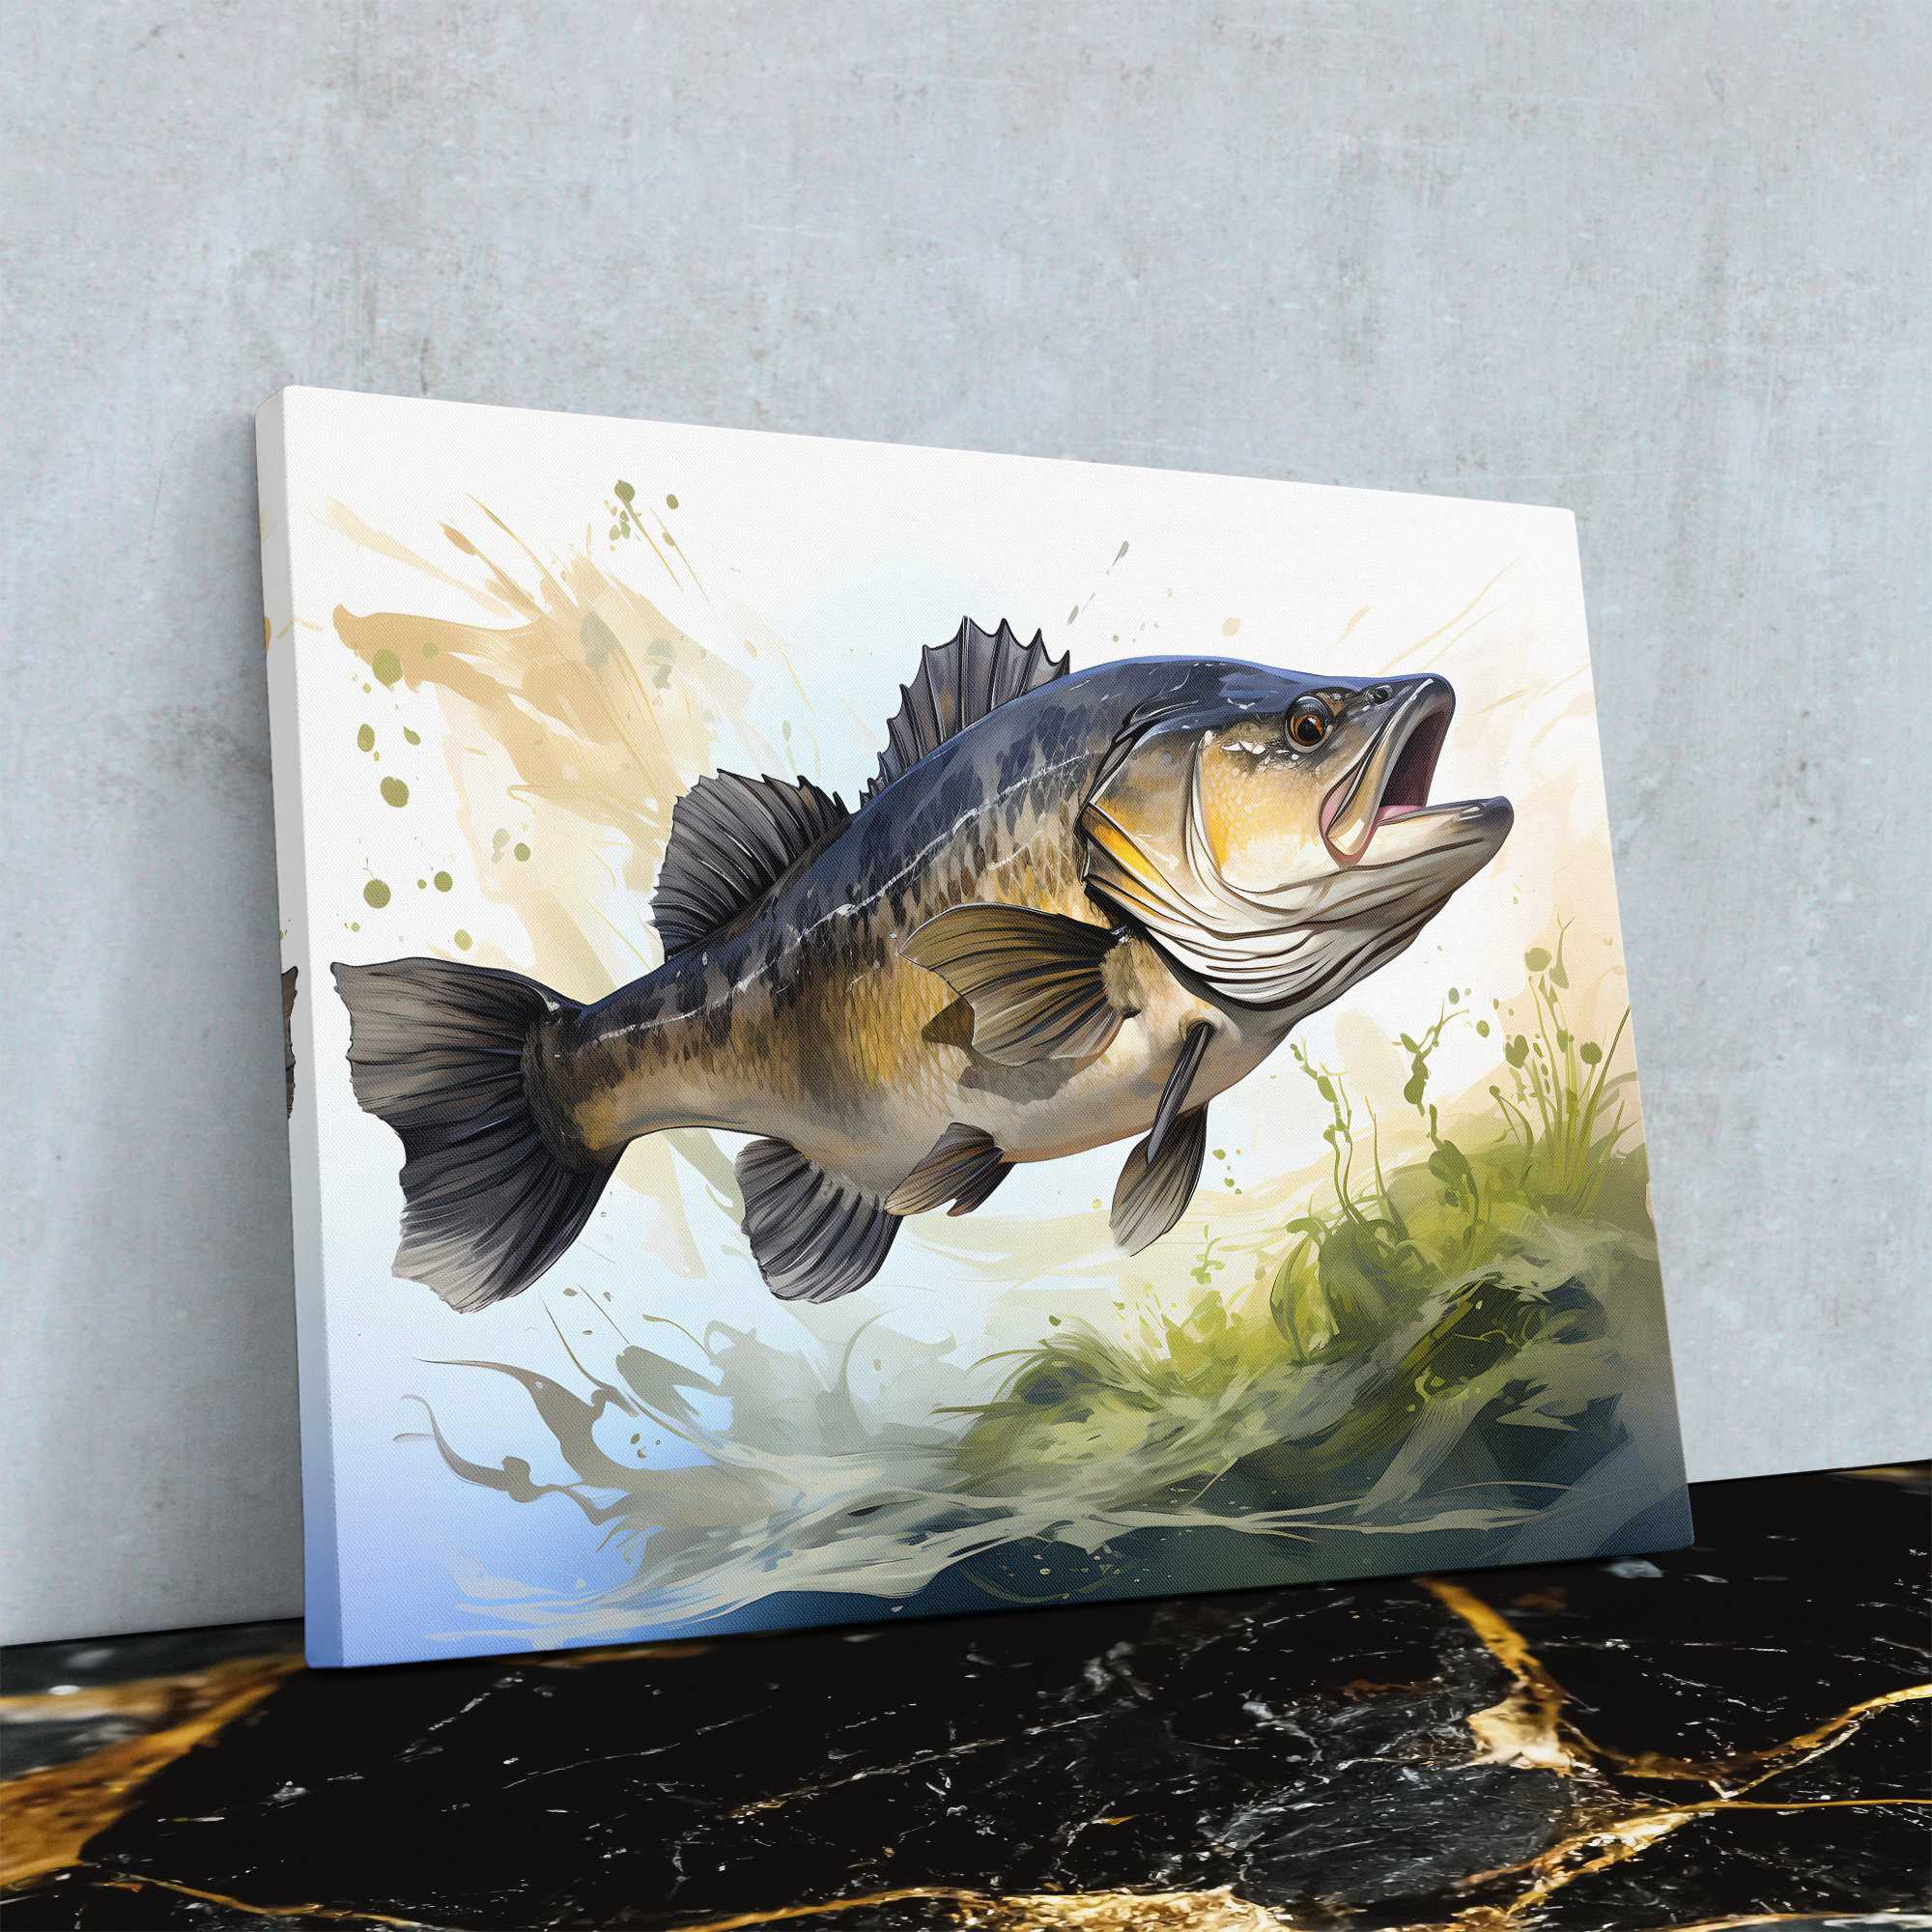 Largemouth Bass Fishing Boat 5 Piece Canvas Print Picture HOME